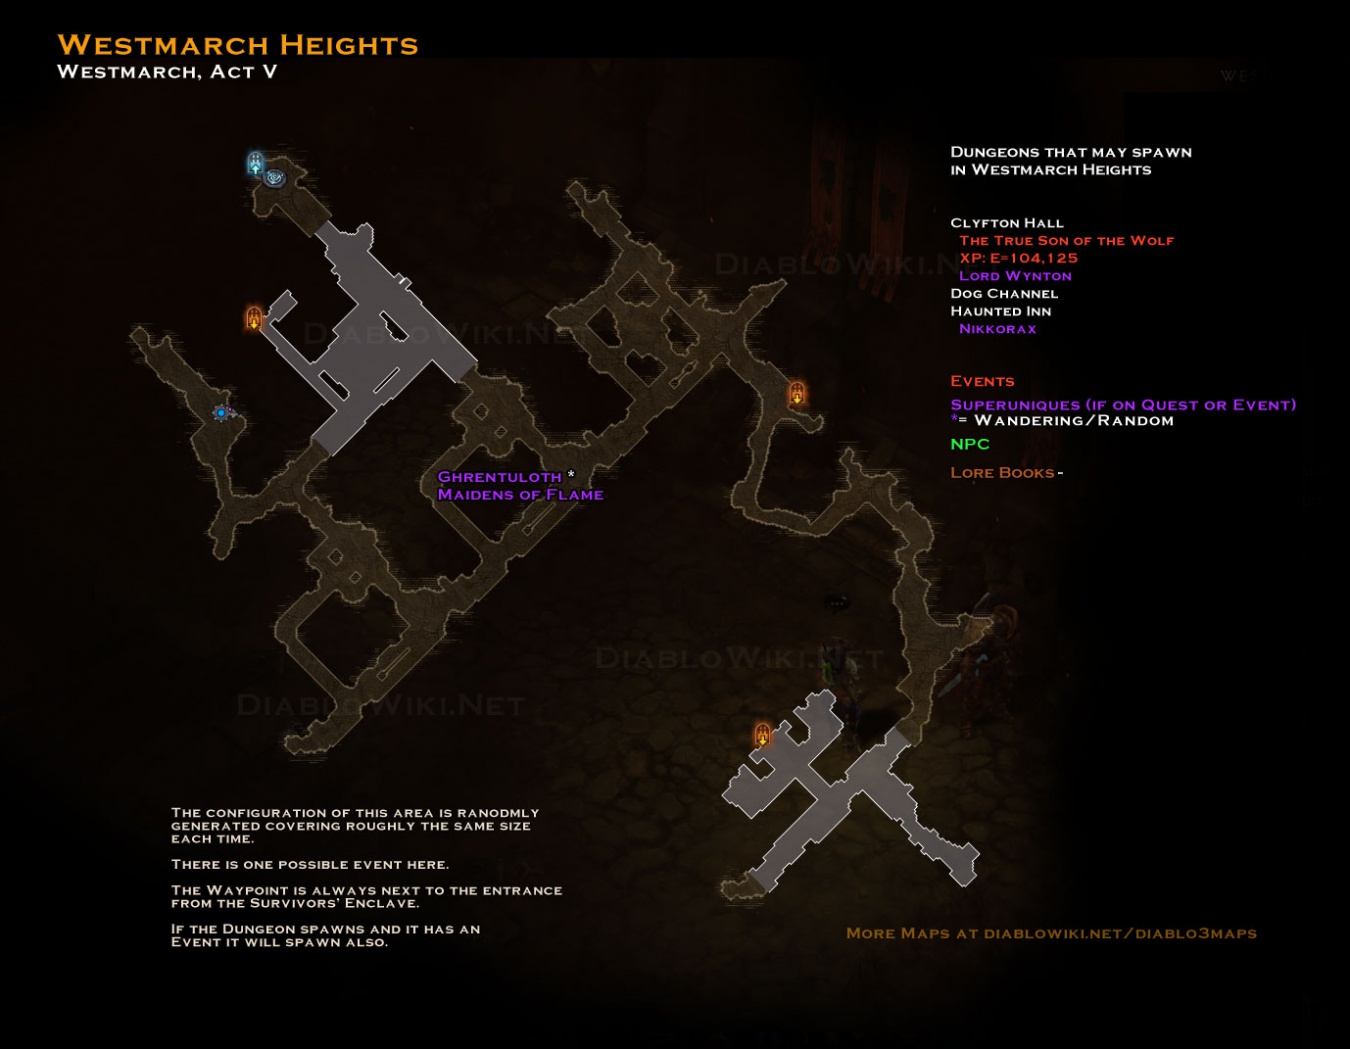 Westmarch-heights-map2.jpg